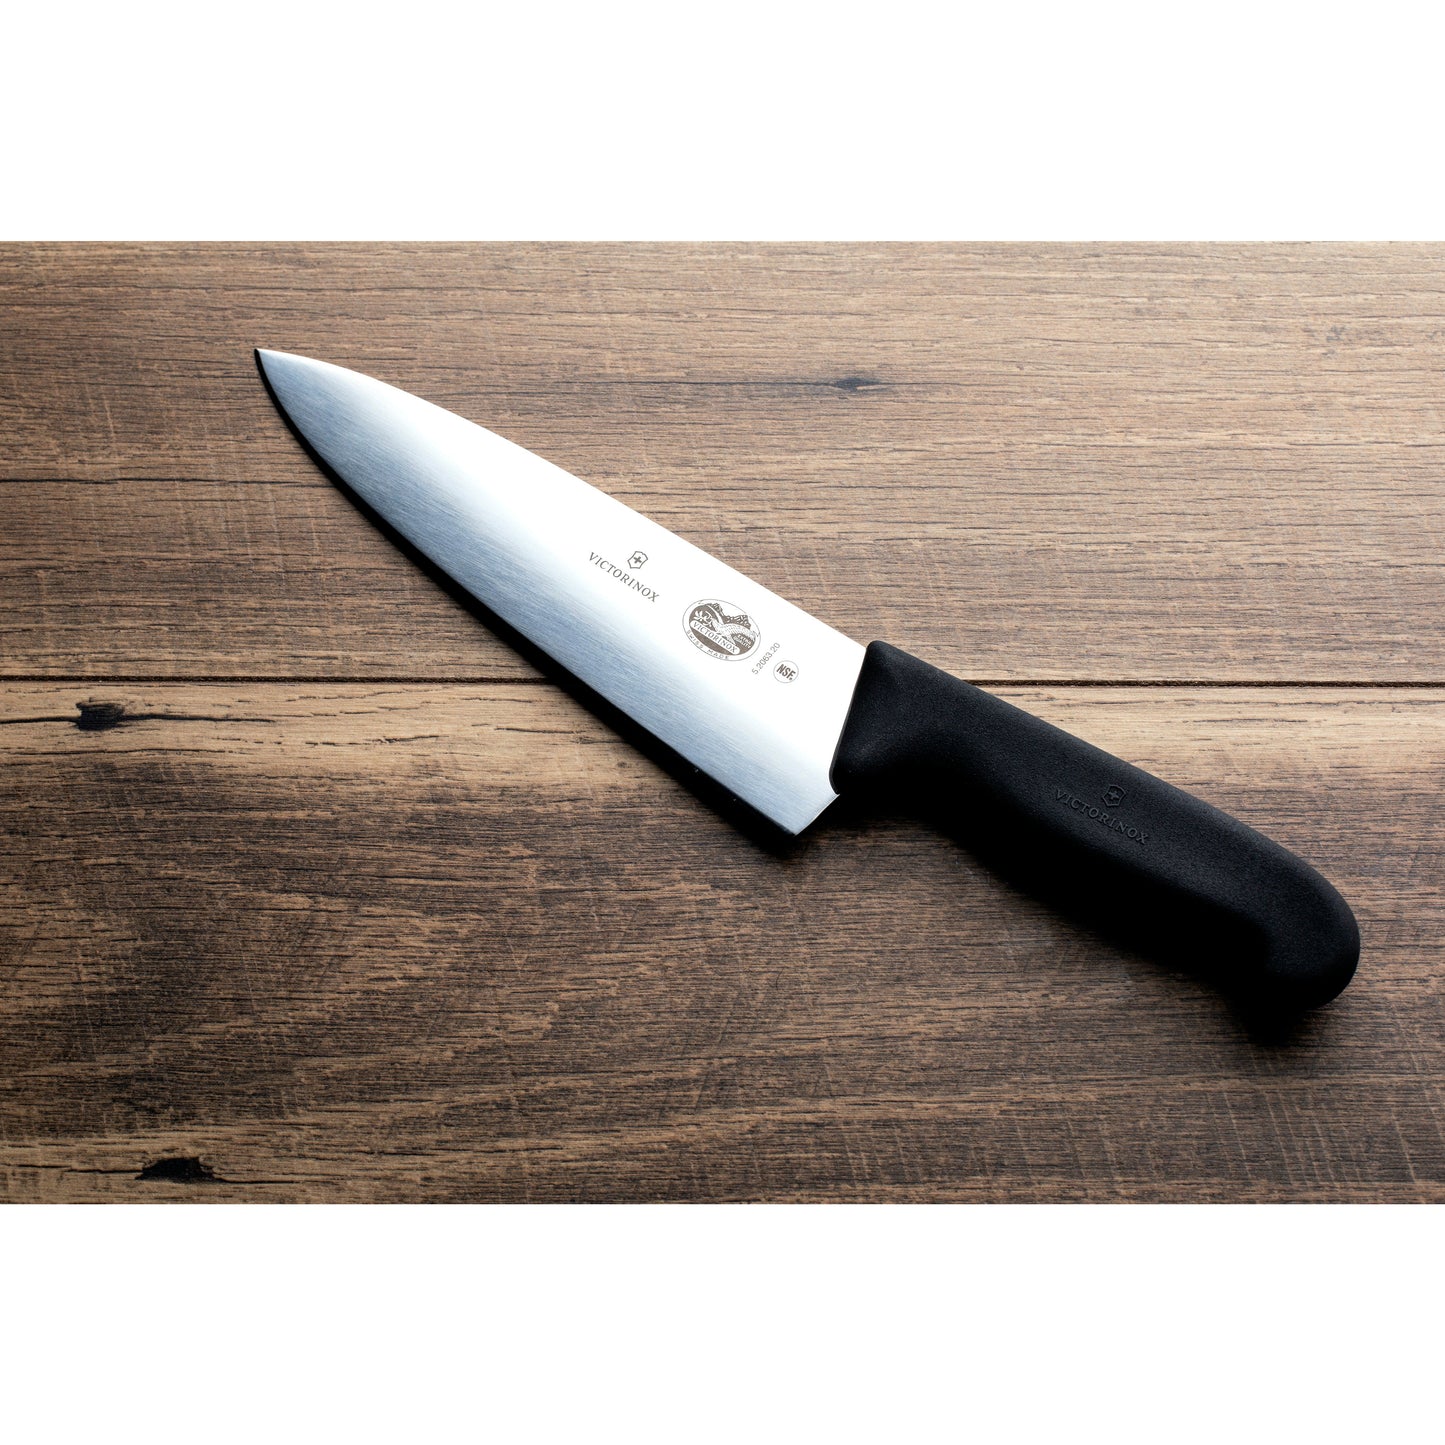 Fibrox® Pro 8'' Chef’s Knife, Extra Wide